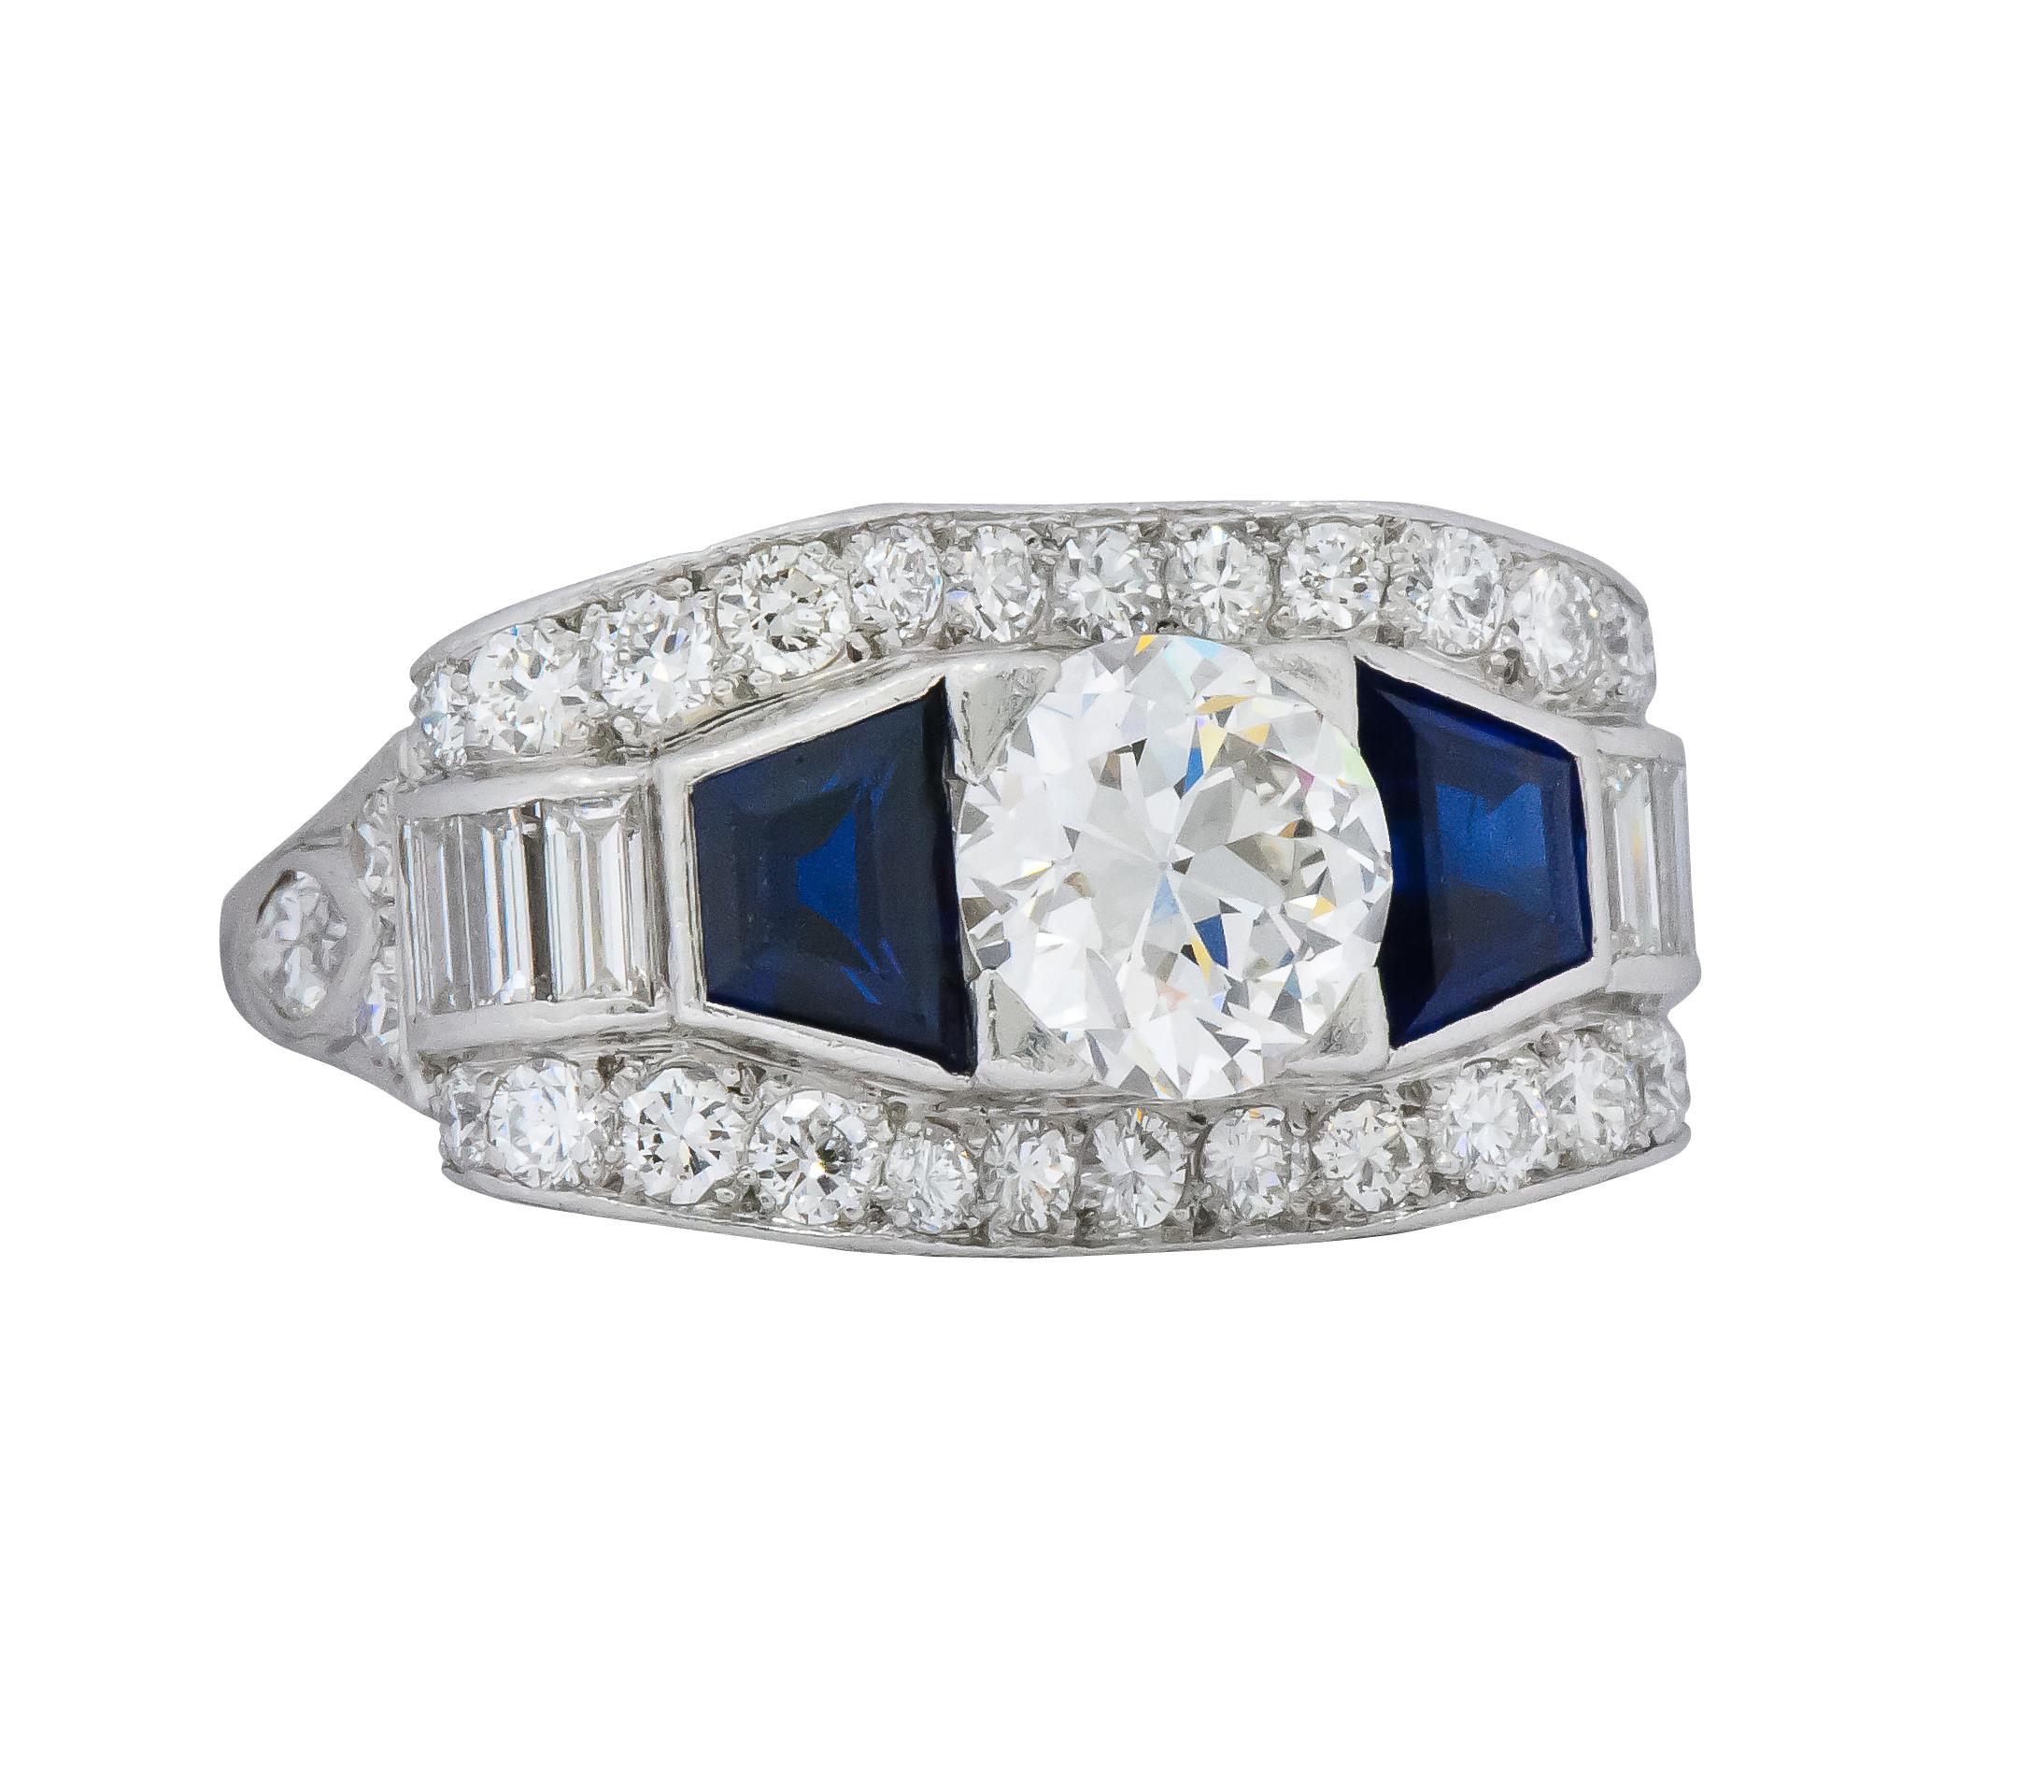 Centering an old European cut diamond weighing approximately 1.50 carats, H color and SI1 clarity

Flanked by trapezoid cut sapphires weighing approximately 1.20 carats total, bright deep blue and very well matched

Accented throughout with round